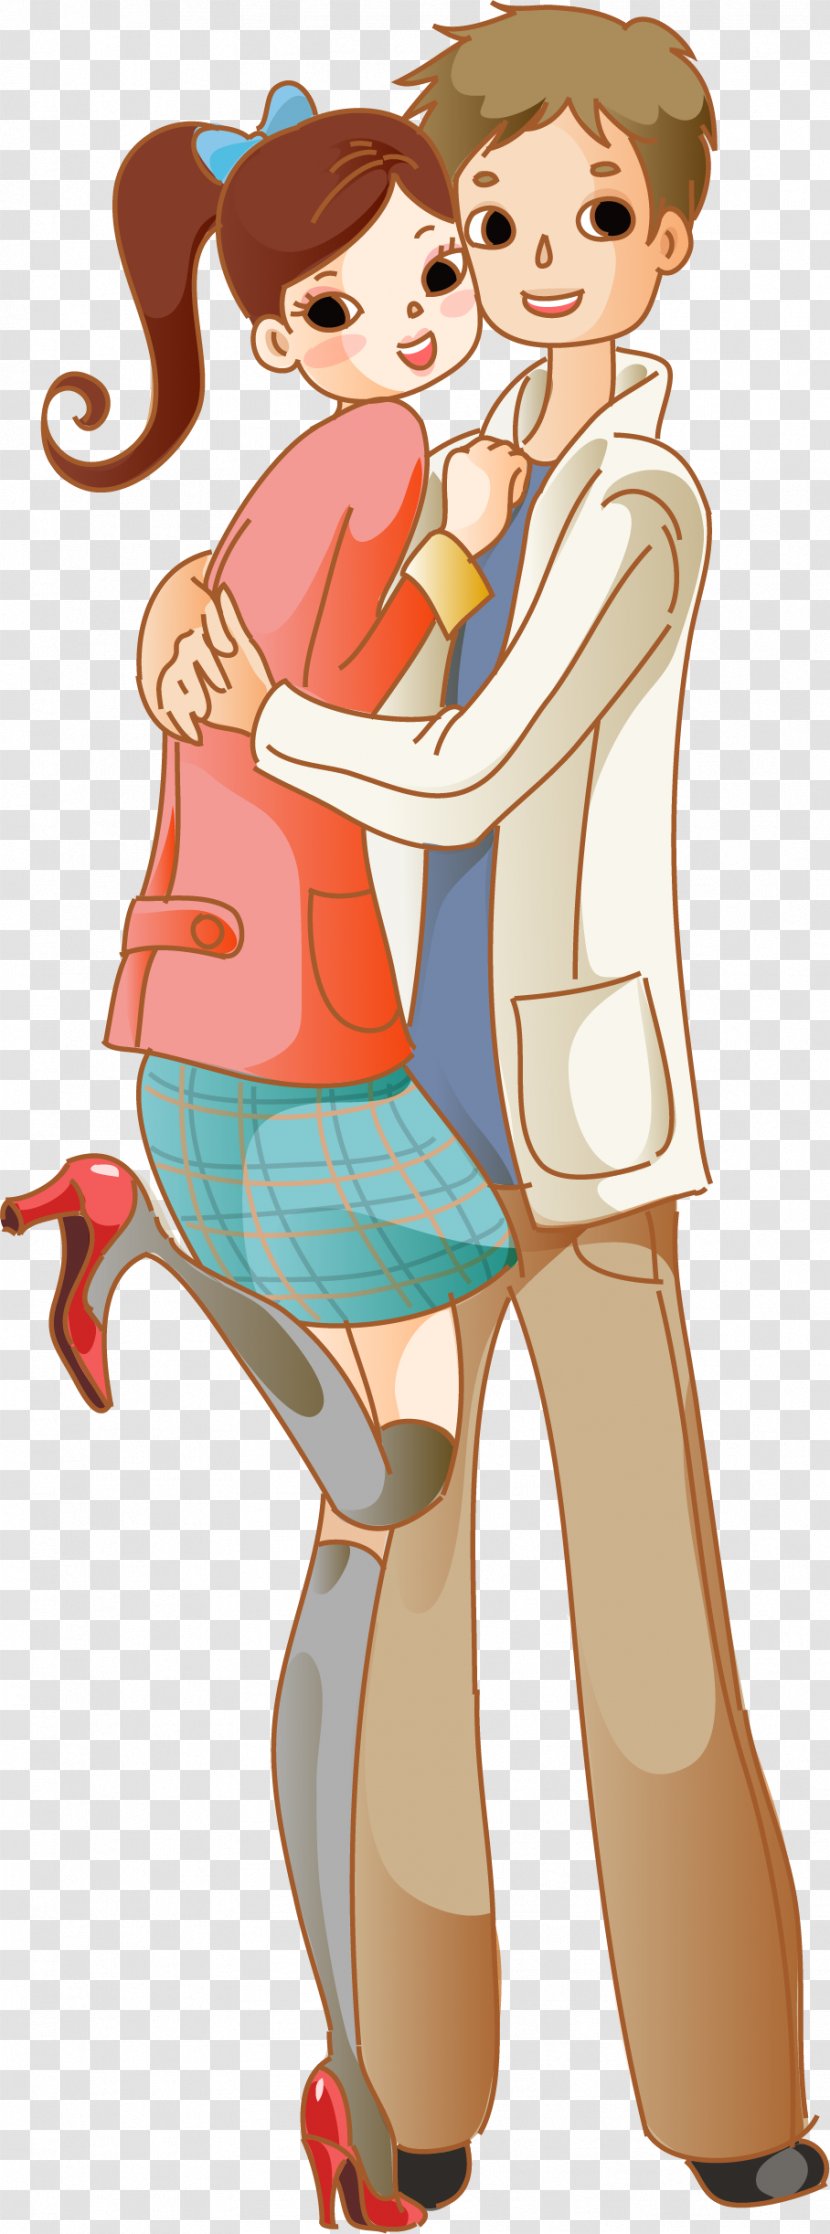 Significant Other Cartoon Illustration - Watercolor - Vector Small Couple Transparent PNG